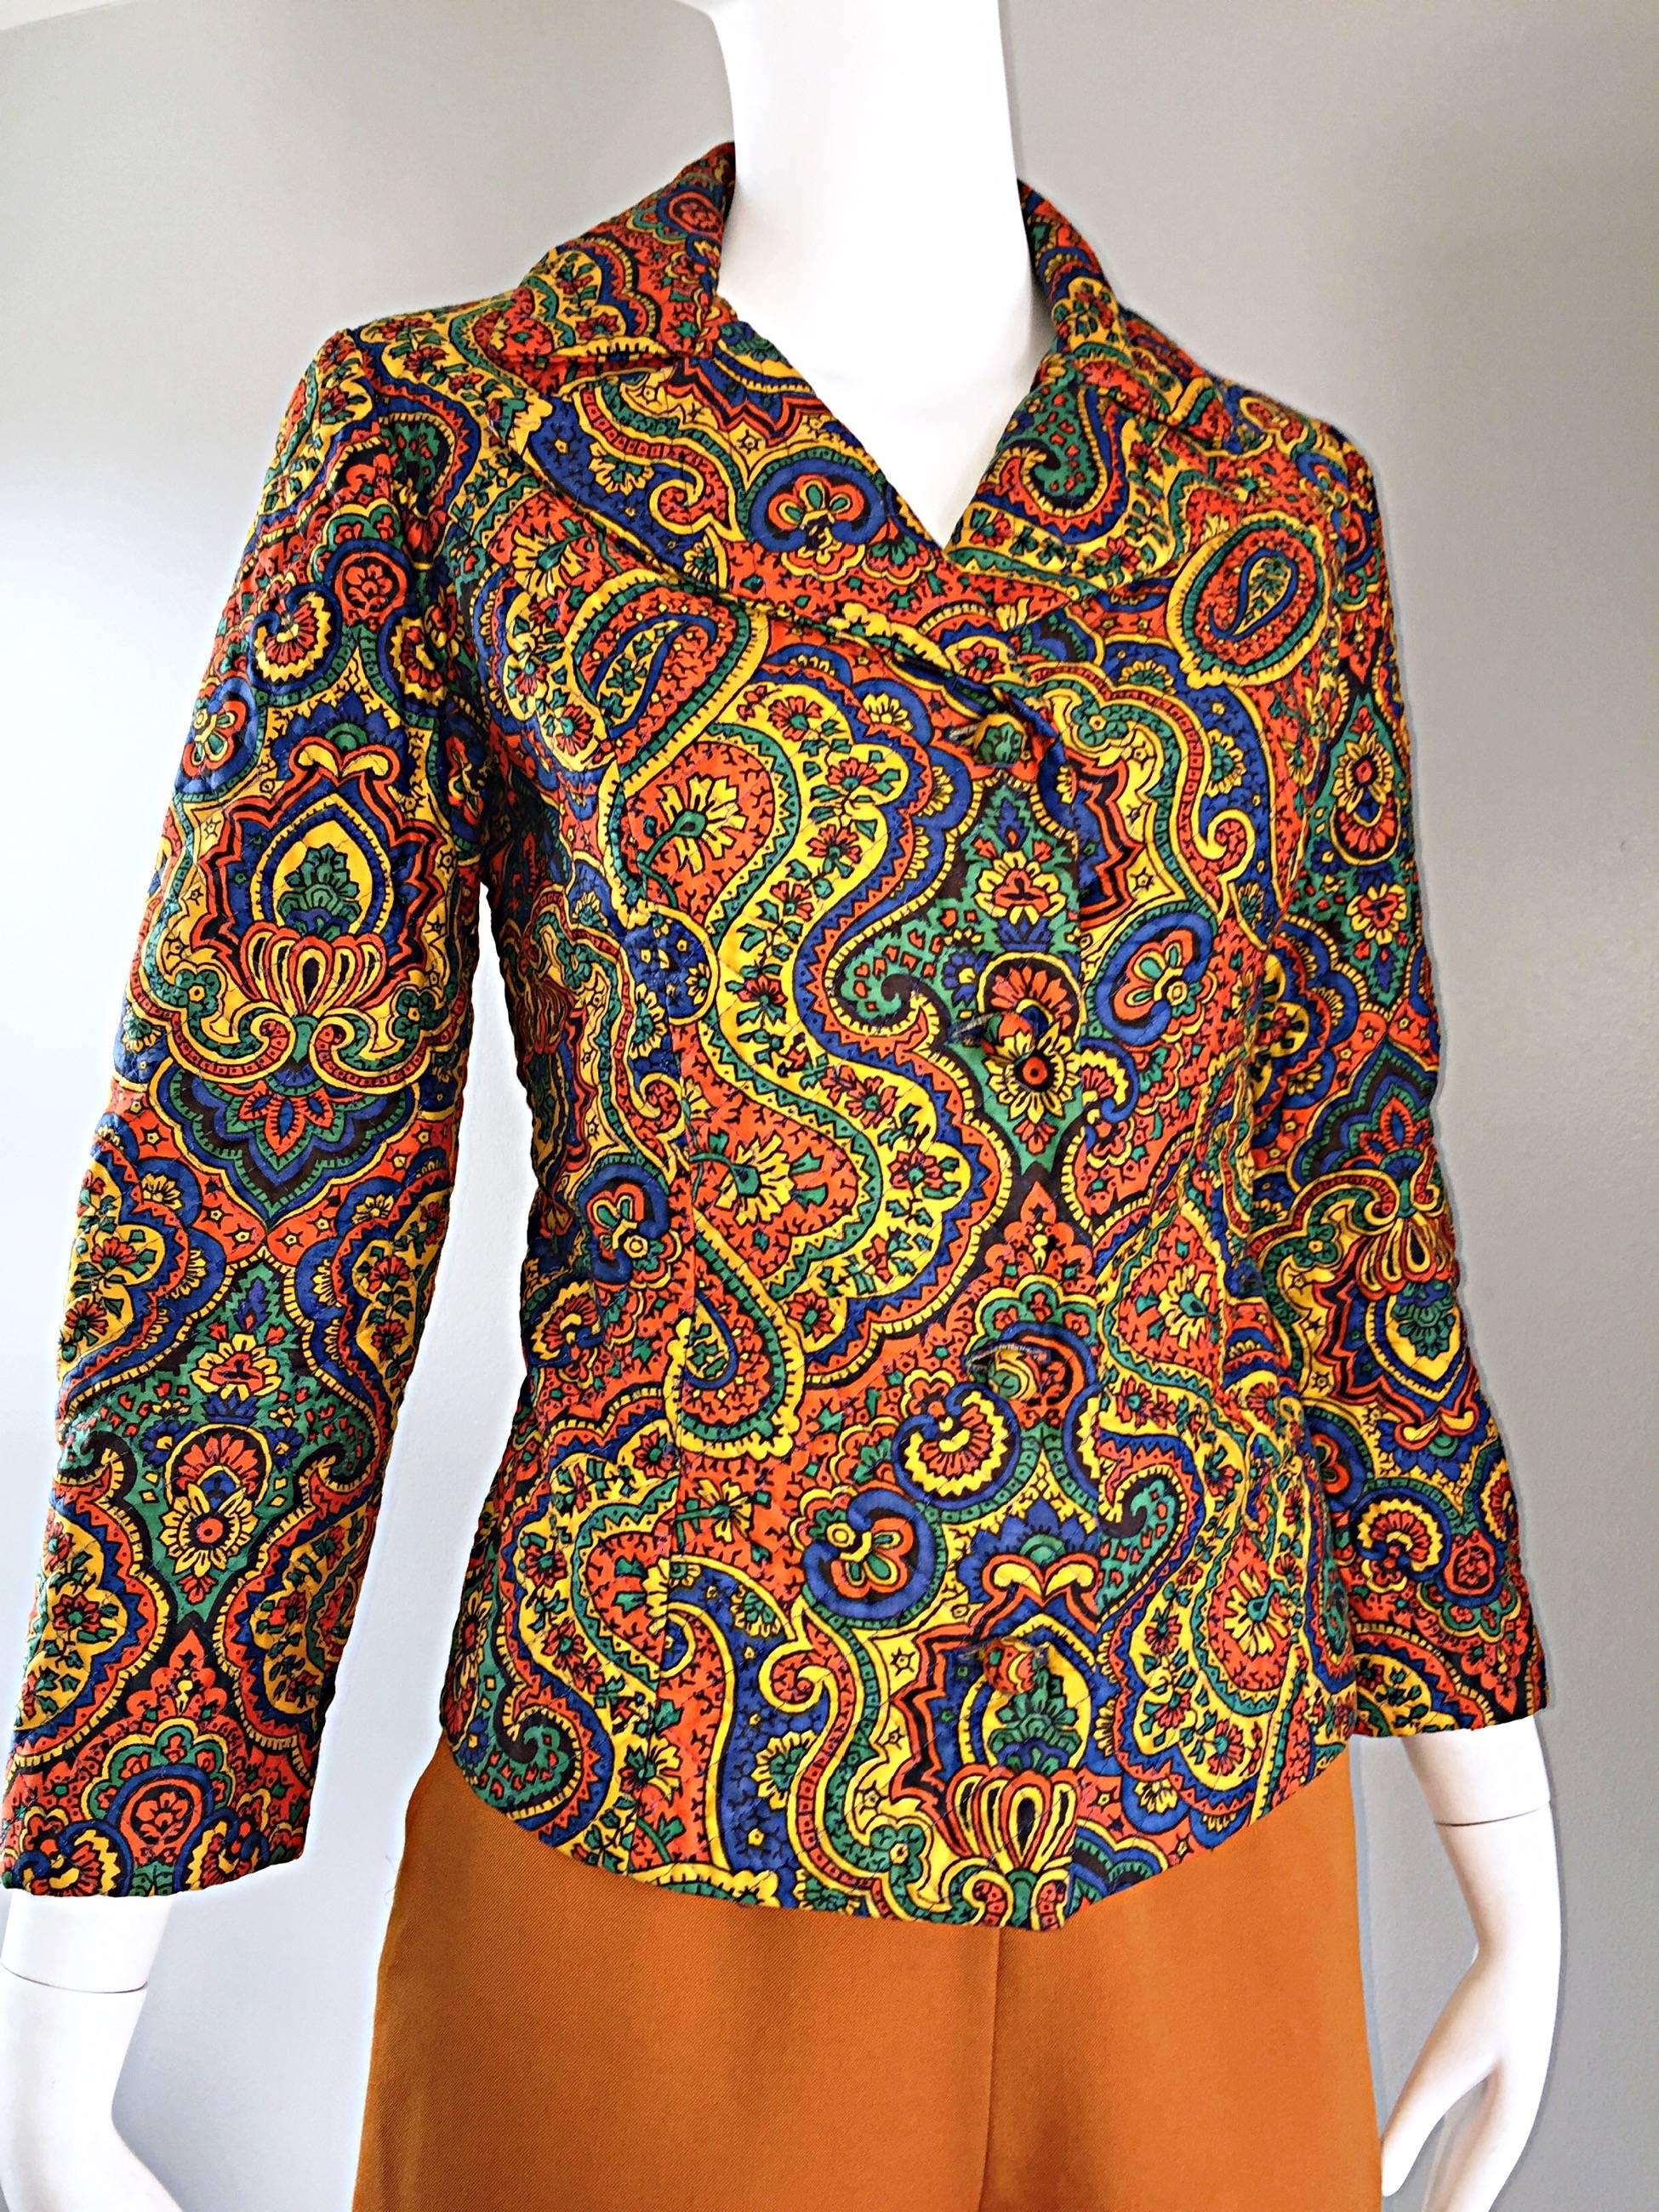 Rare Vintage Wippette 1960s Mod Paisley Cotton Quilted Psychedelic Blazer Jacket 1